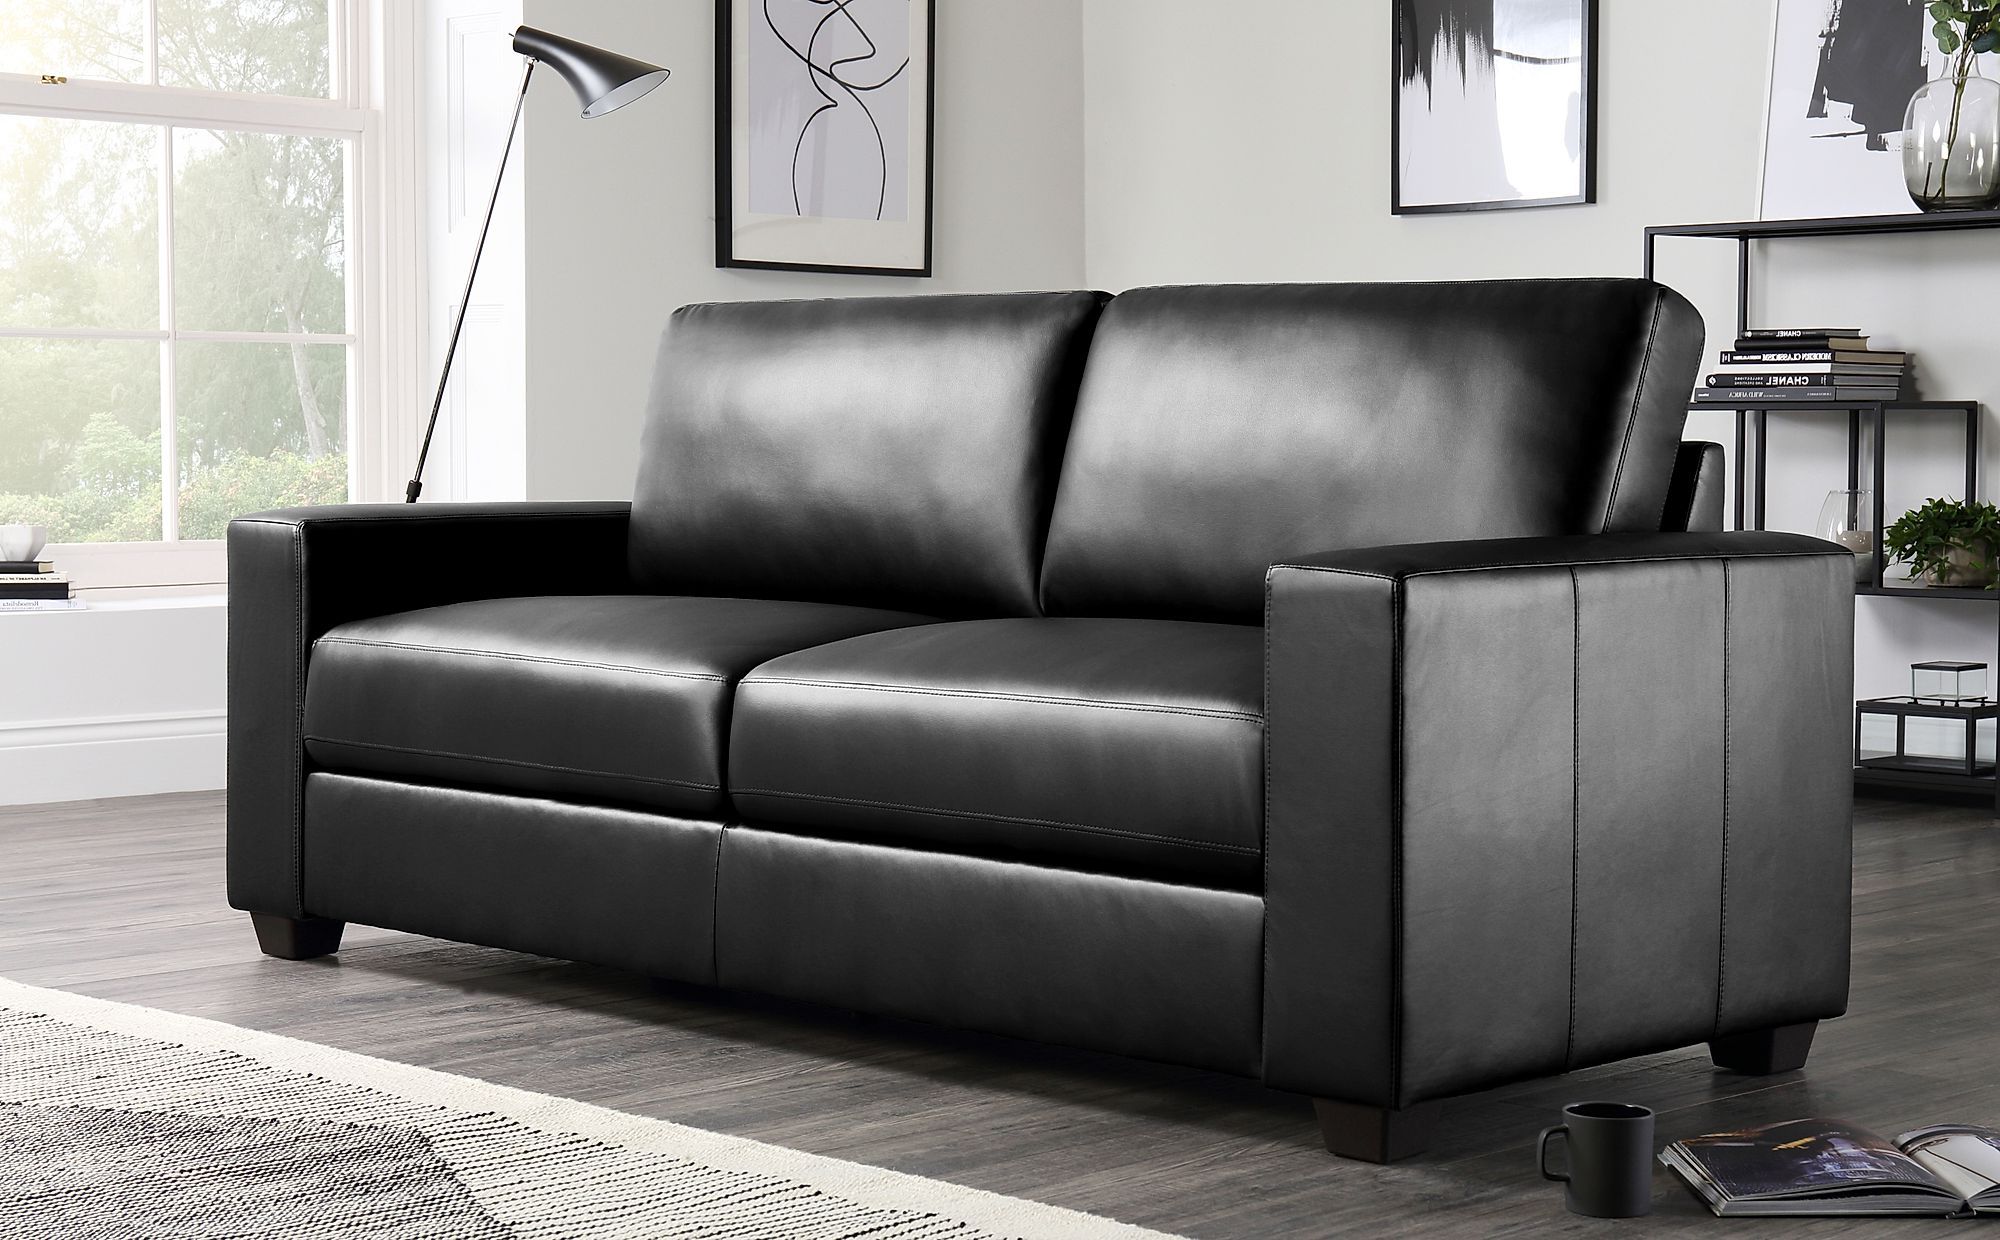 Most Recent Sofas In Black In Black Leather 3 Seater – The Arched Arms Look Great On This Sofa Suite. (Photo 6 of 15)